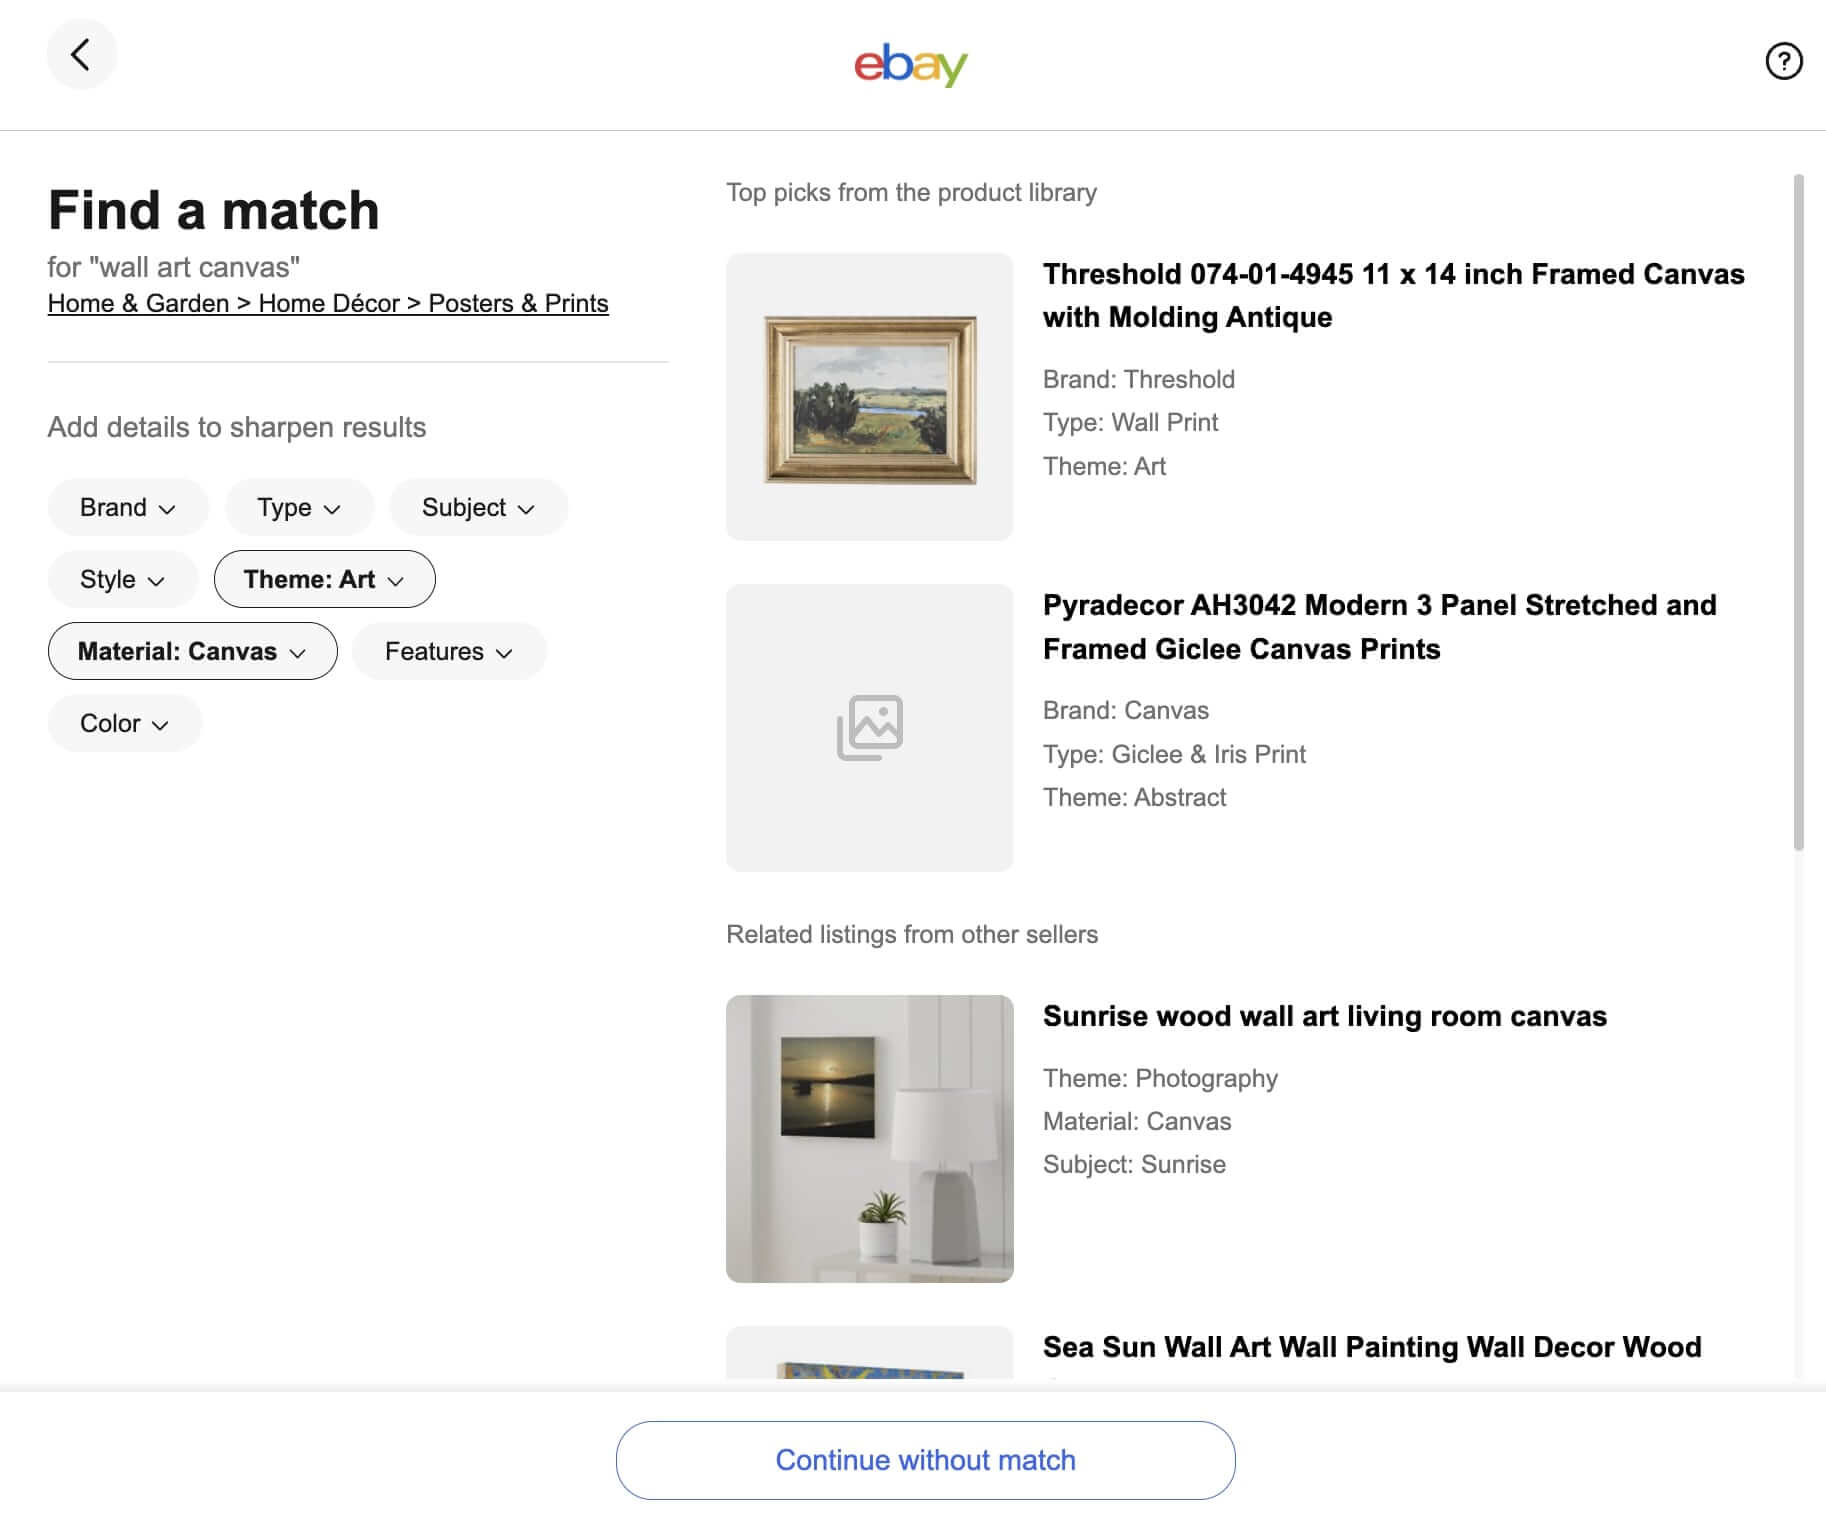 The "Find a match" page on eBay listings with the Home & Garden > Home Decor > Posters & Prints selected. eBay shows mockups of canvas on the right side, including a framed canvas with molding antique and an unframed canvas, both displaying landscape and exposed on white walls.